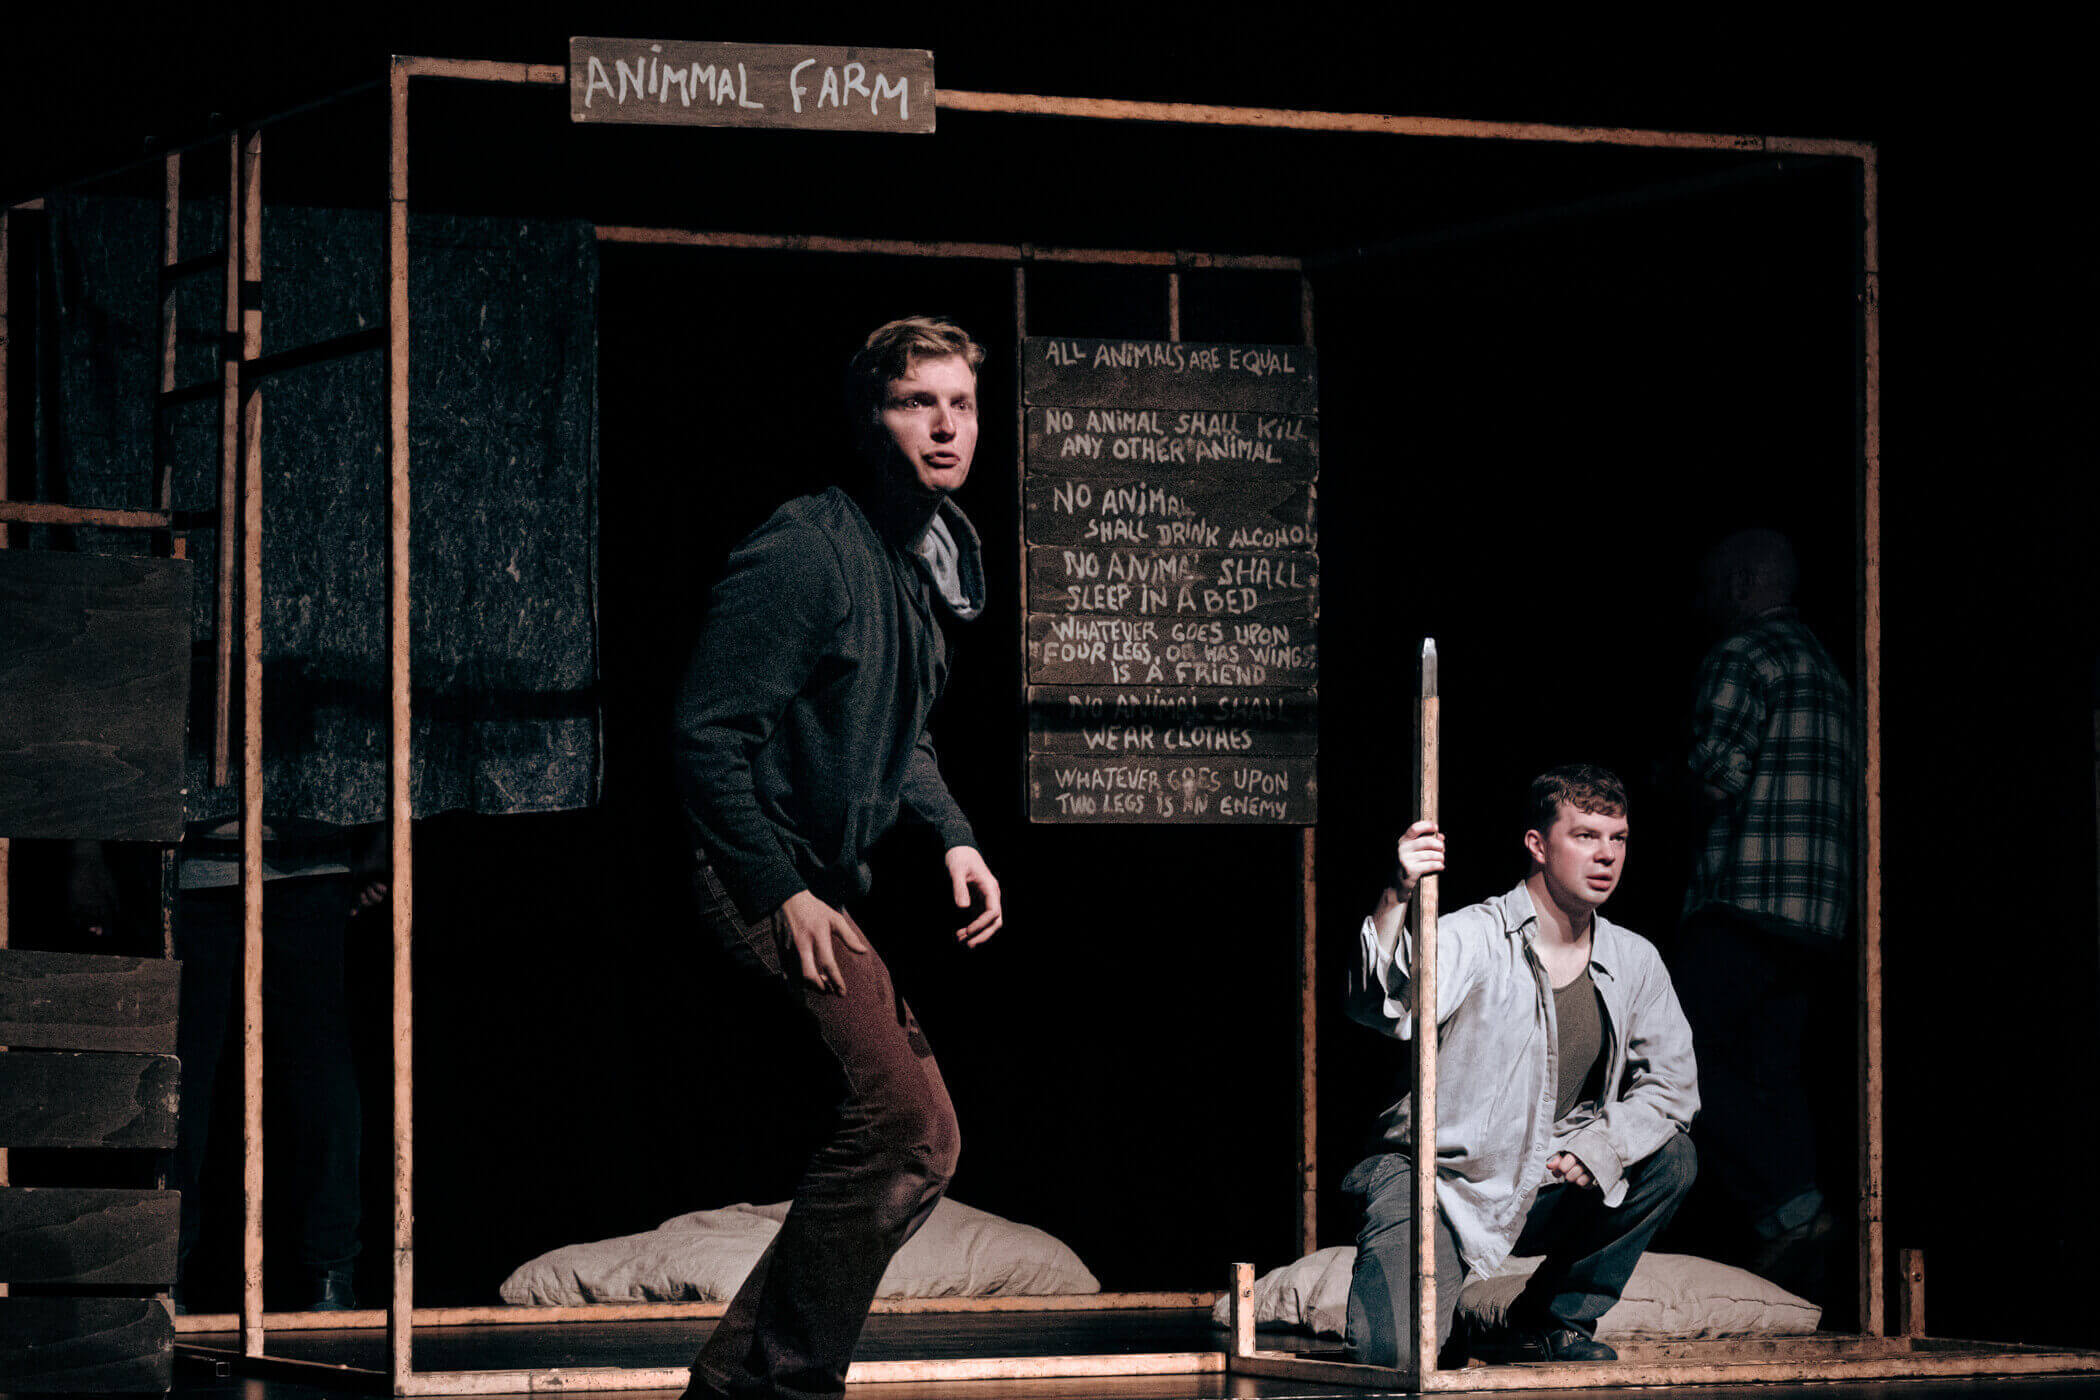 Animal farm play with two men on stage